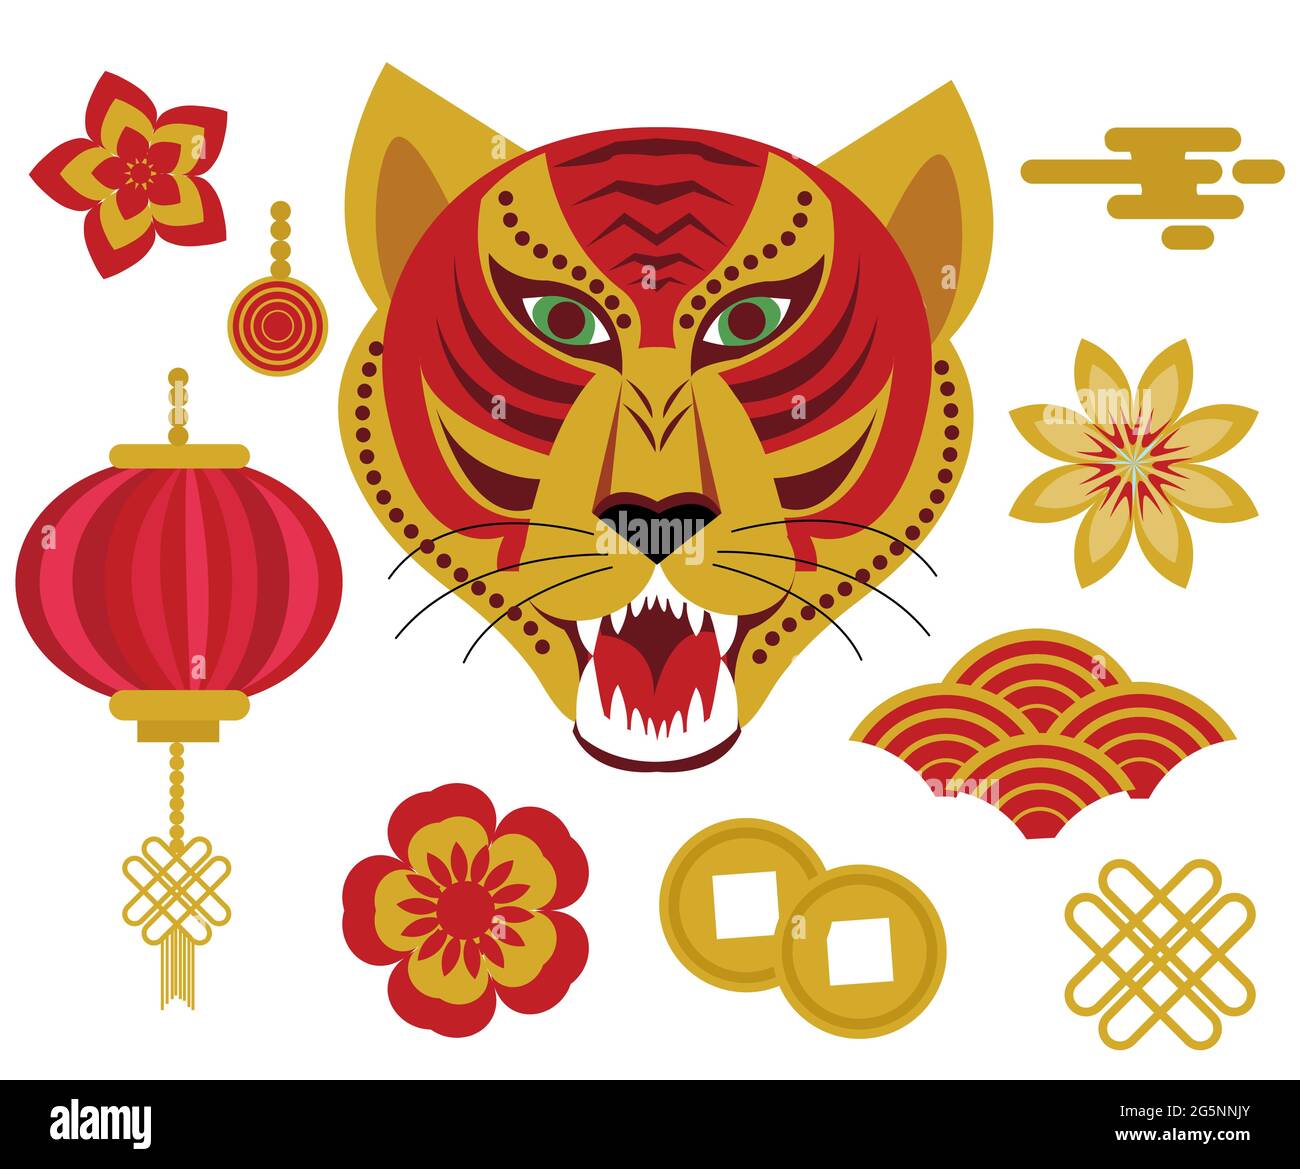 Year of the tiger 2022 chinese horoscope icons set. Chinese New Year collection of design elements with tiger, paper lantern, clouds, flowers. Vector Stock Vector